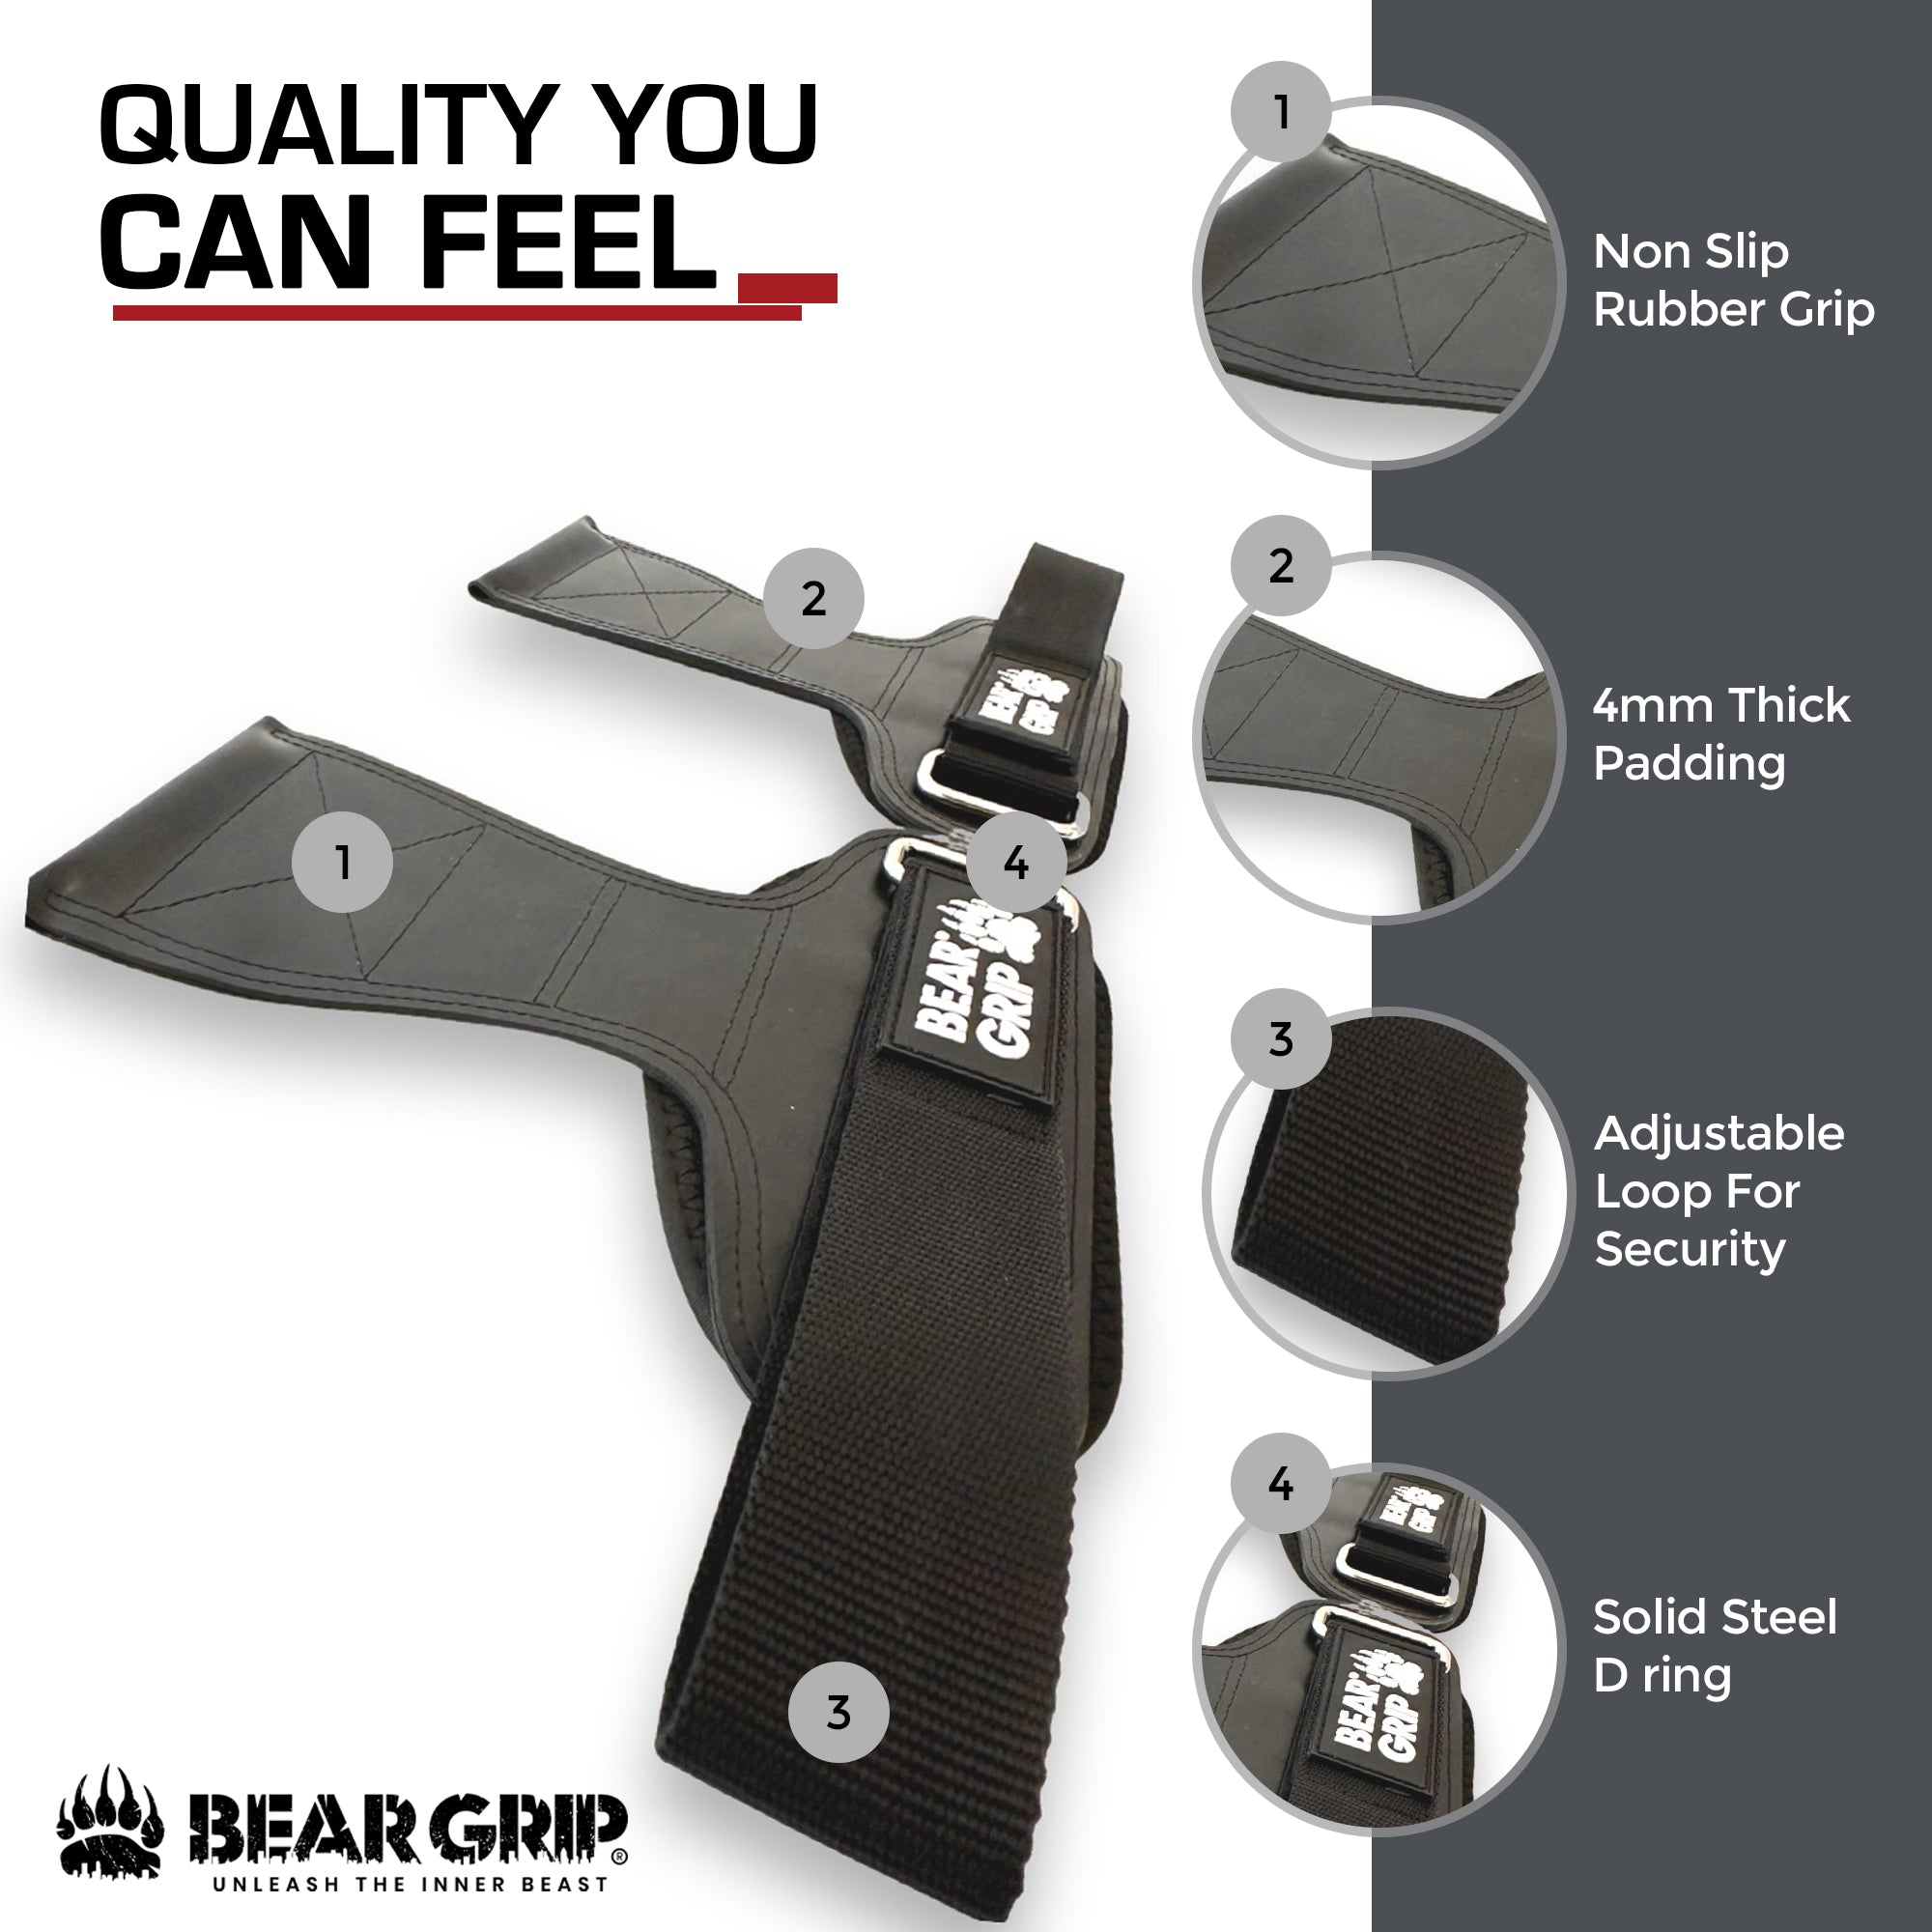 BEAR GRIP - Multi Grip Straps, Heavy Duty Weight Lifting Straps